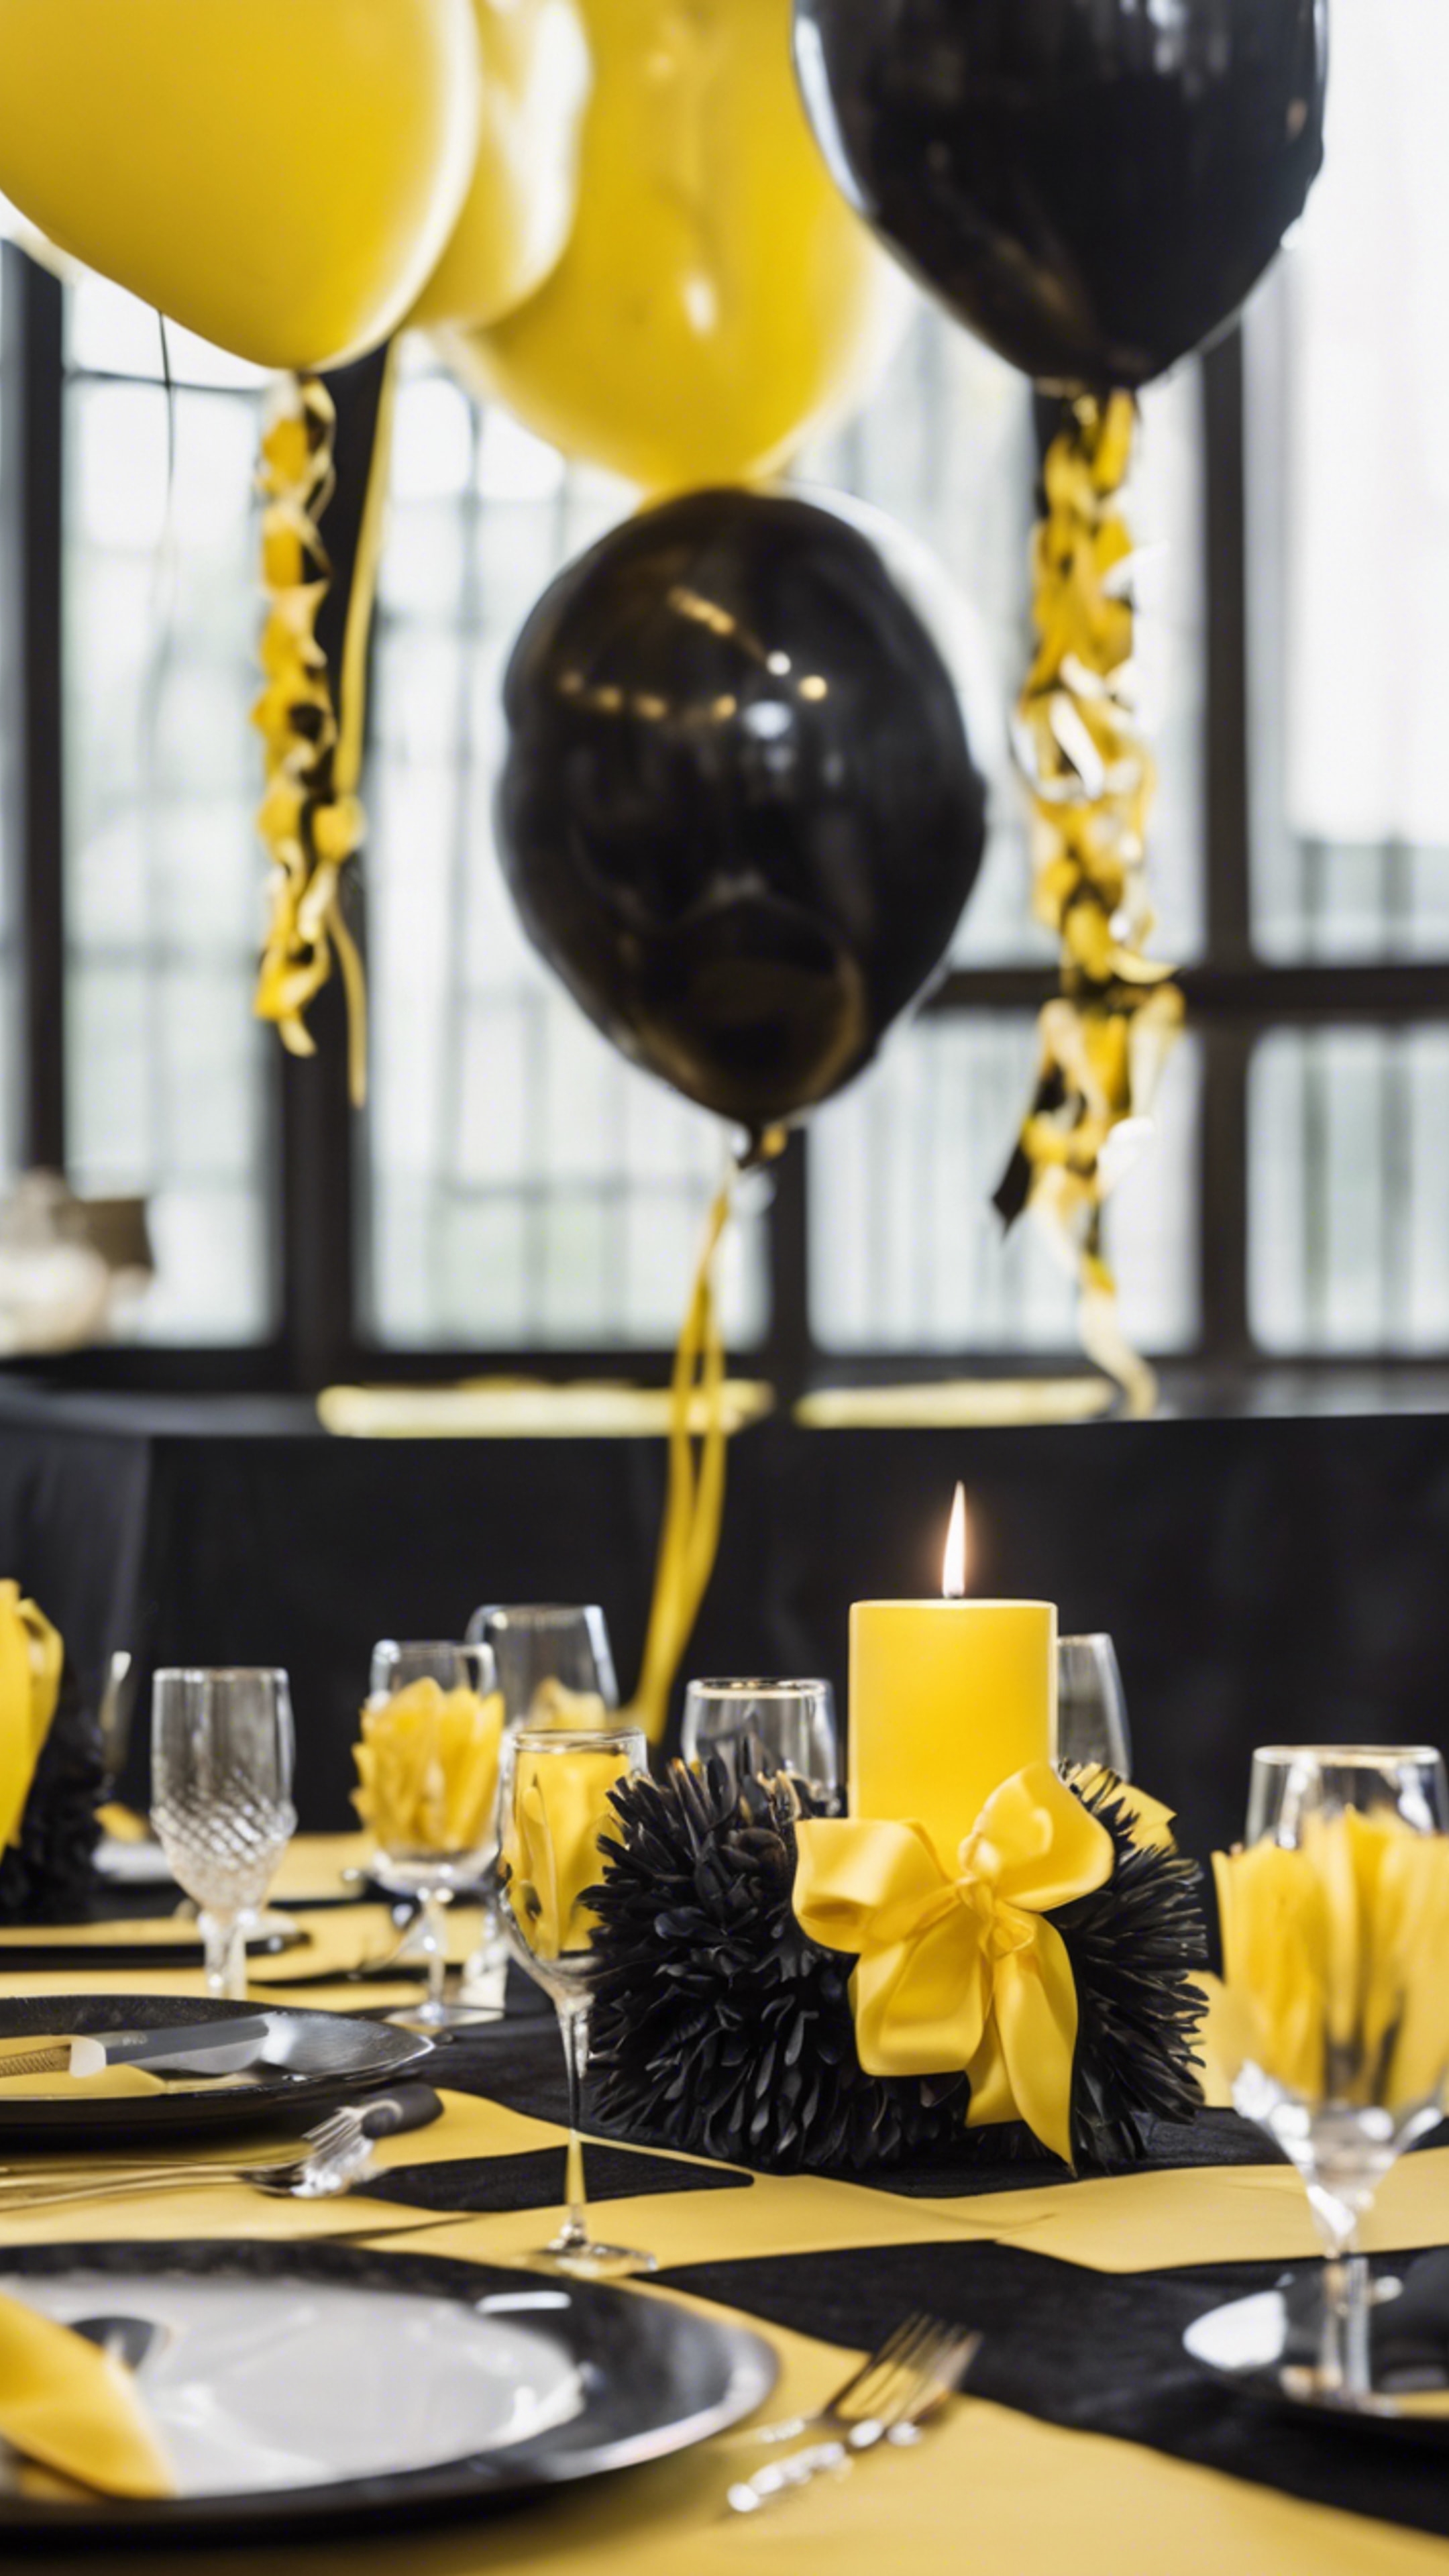 A table set with black and yellow themed party decorations for a birthday celebration. Tapeta[799426b85ea14846a022]